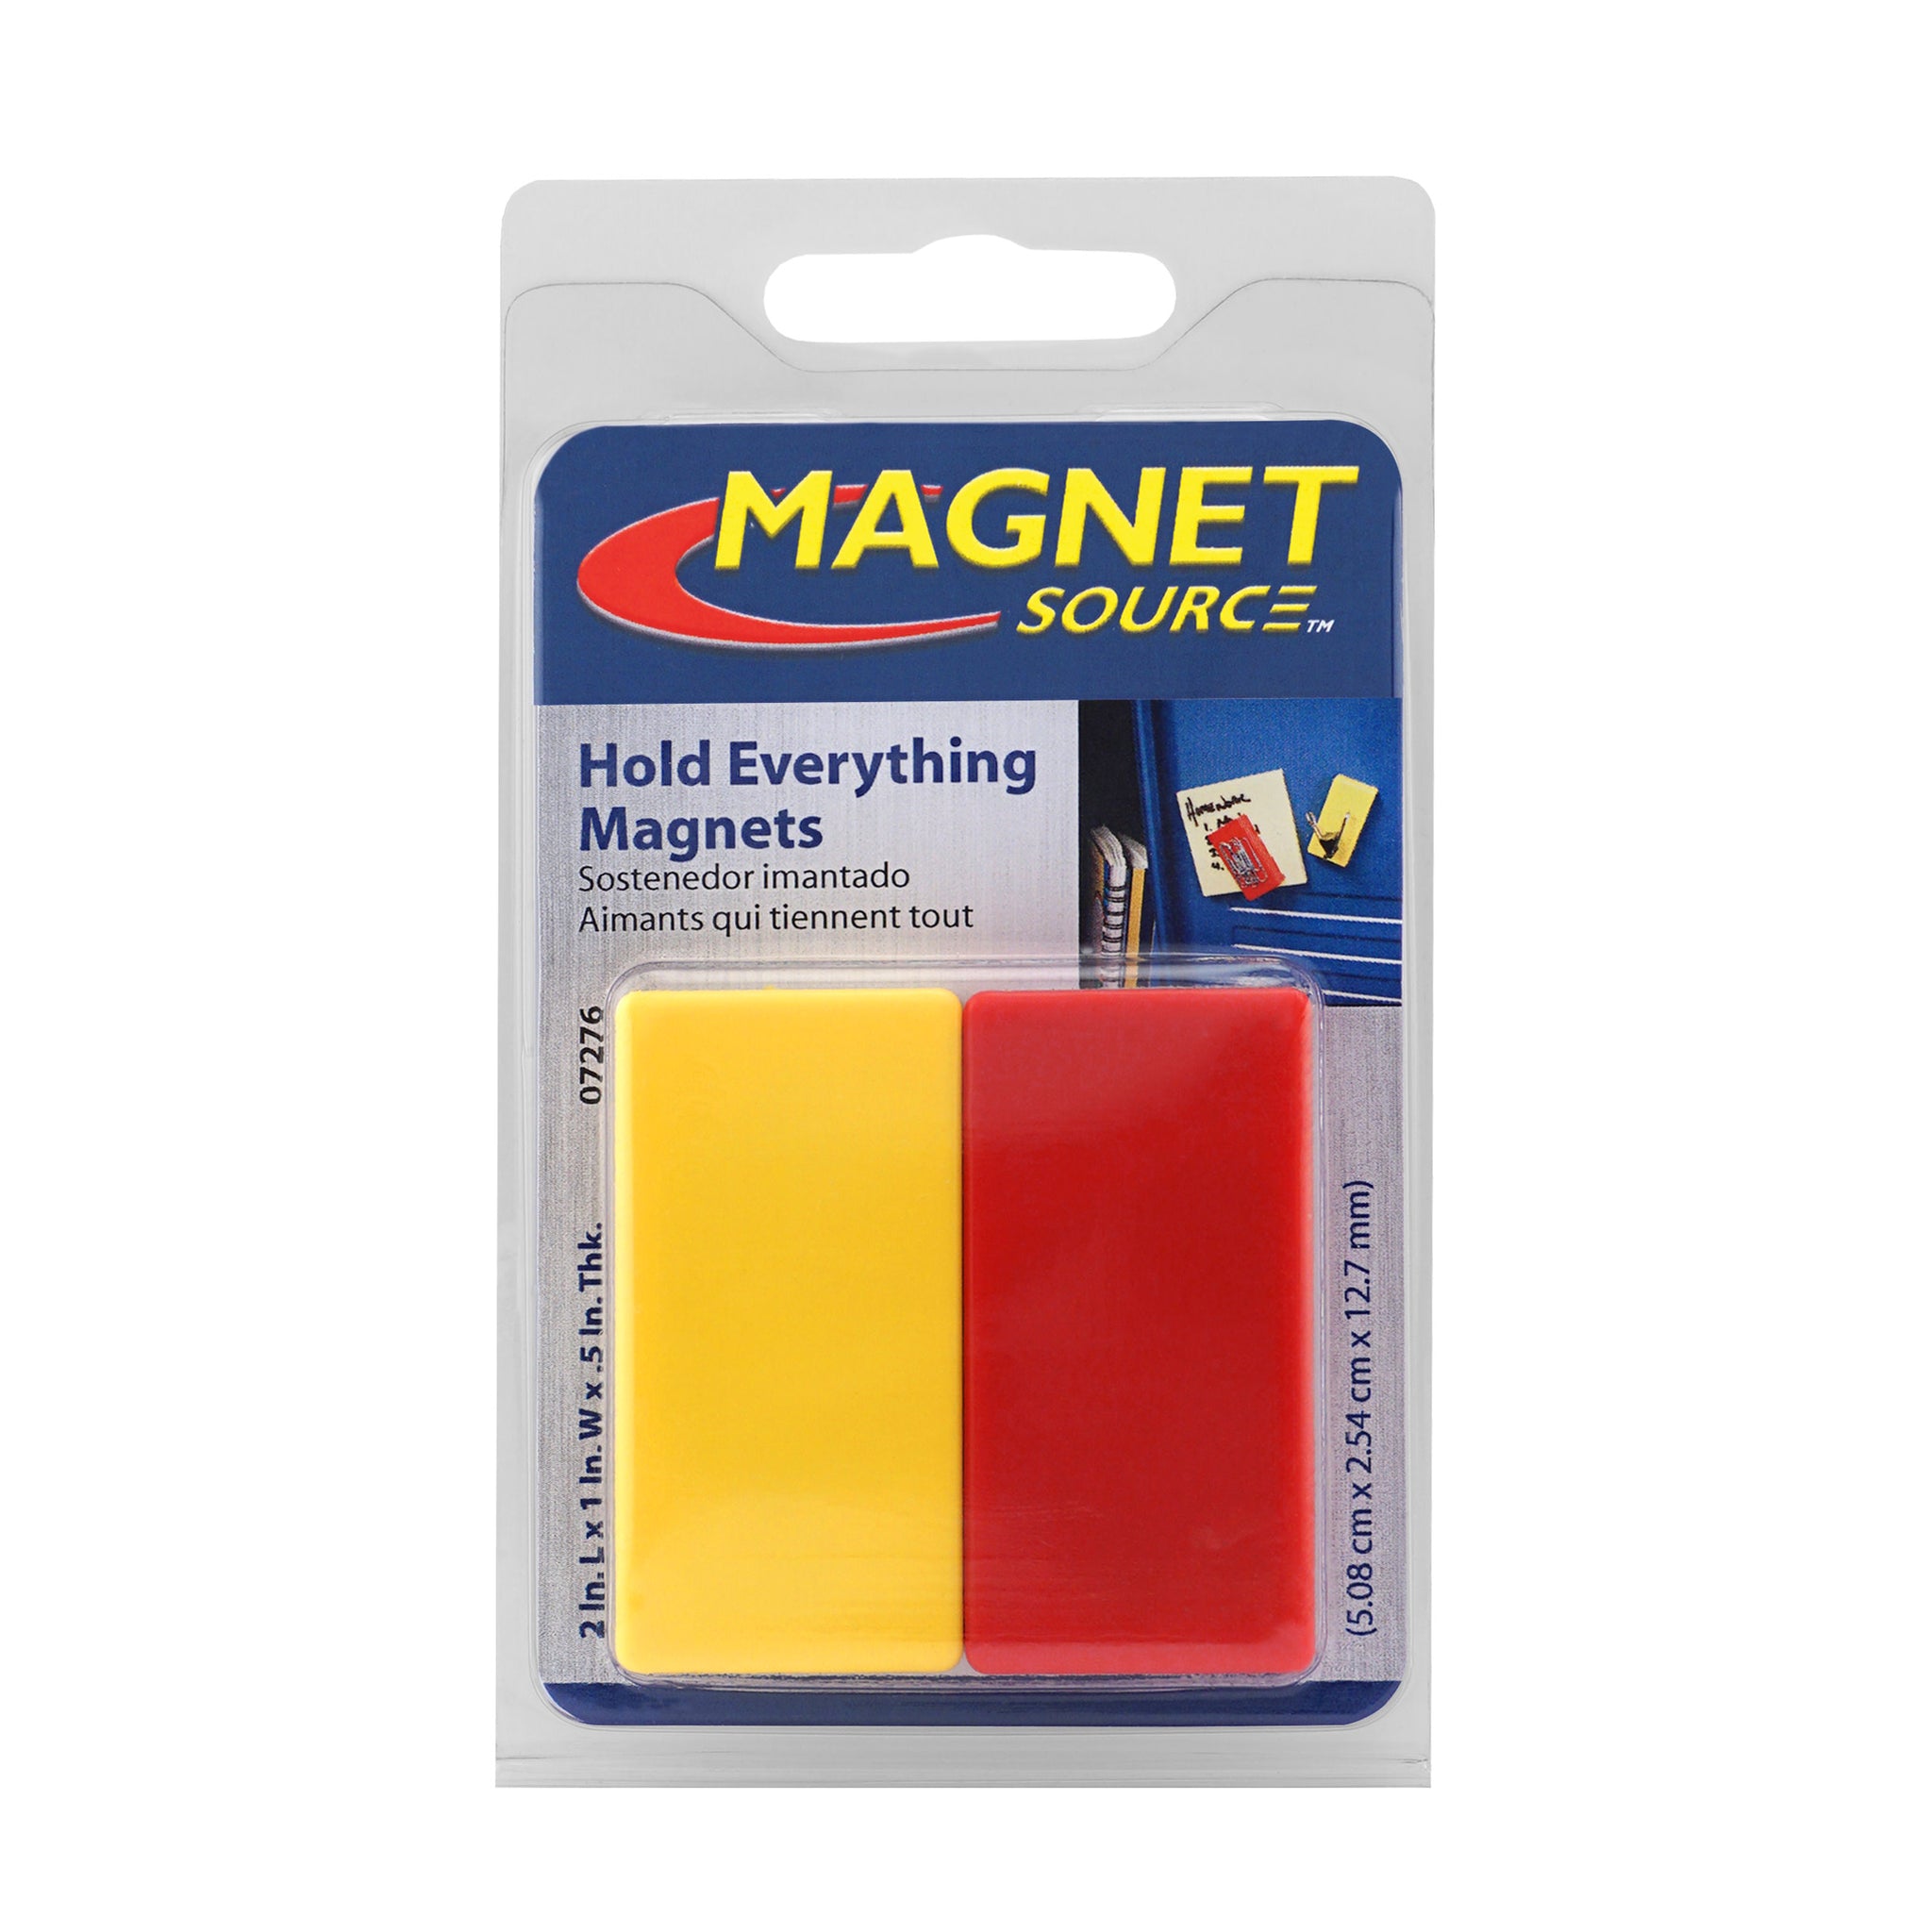 How Much Will a Magnet Hold?